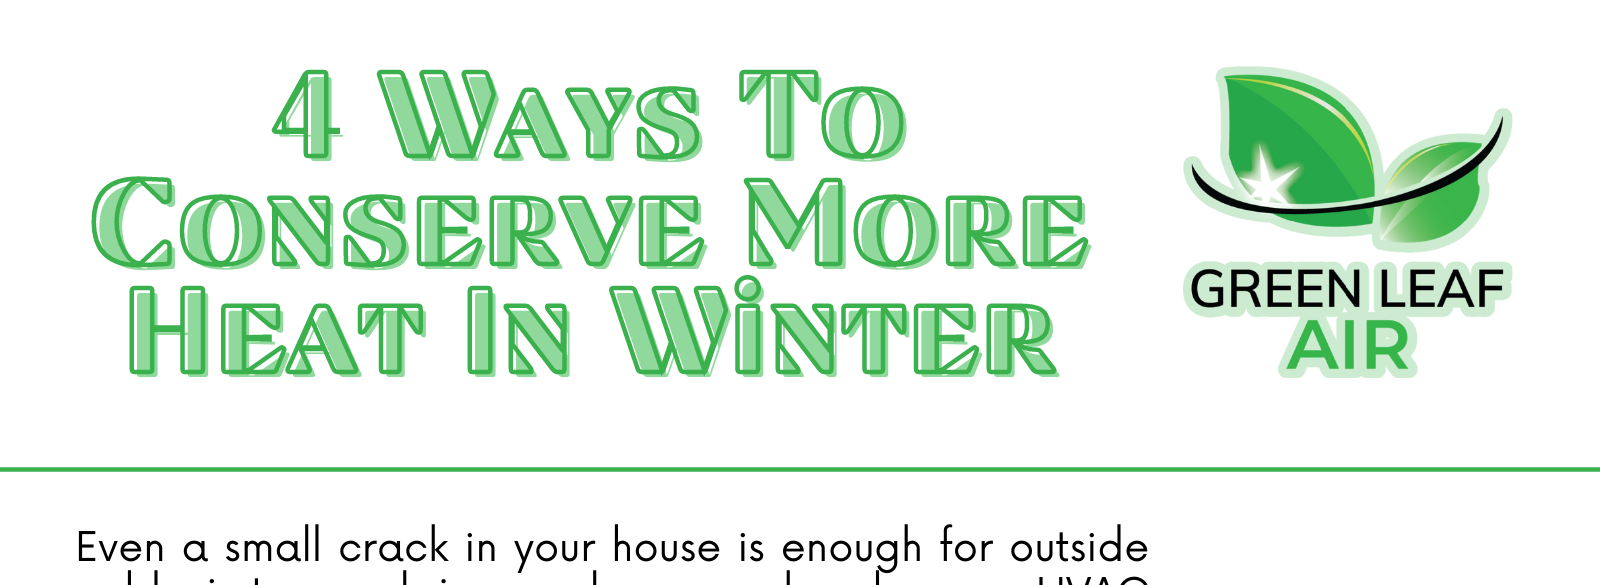 4 Ways to Conserve More Heat in Winter